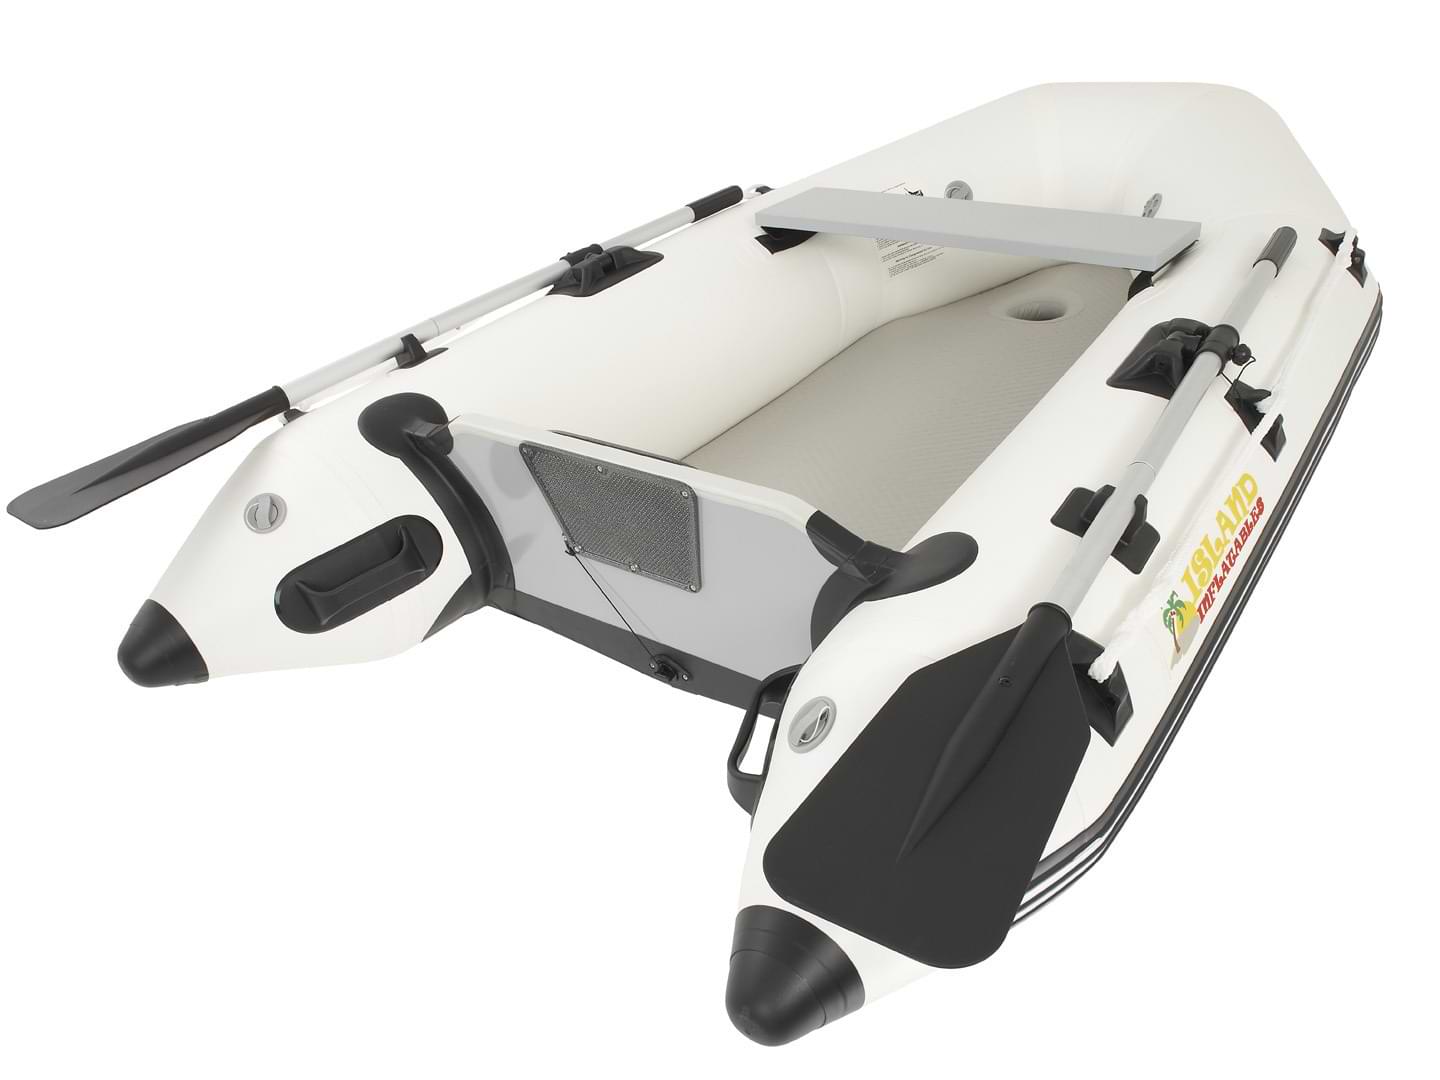 Test Your Nautical Knowledge & Get to Know Your New Inflatable Boat main image